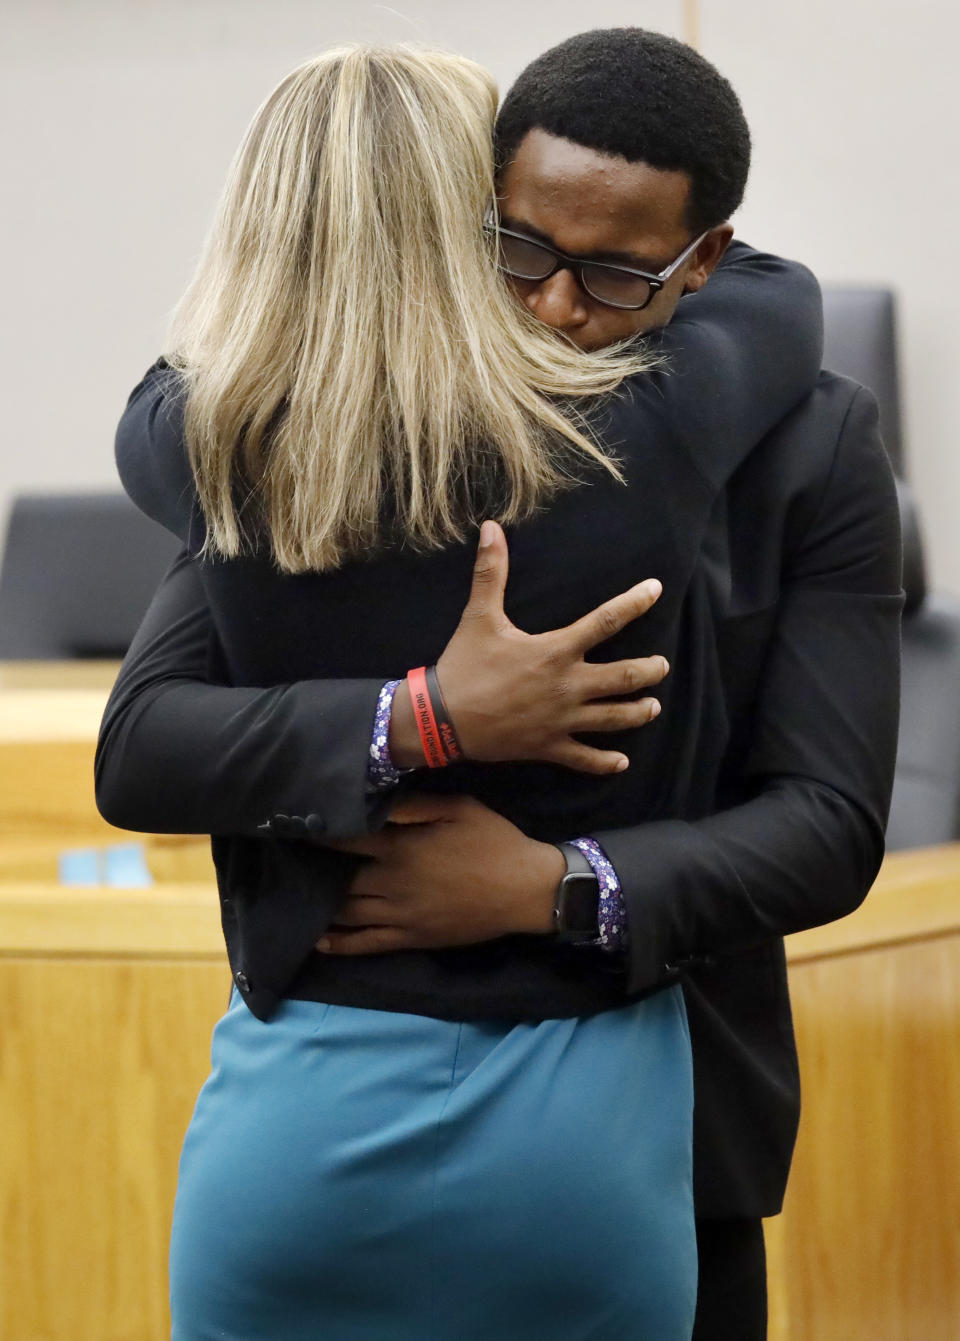 Botham Jean's younger brother Brandt Jean hugs former Dallas police officer Amber Guyger after delivering his impact statement to her in Dallas, Wednesday, Oct. 2, 2019. Guyger has been sentenced to 10 years in prison for killing her black neighbor in his apartment, which she said she mistook for her own unit one floor below. (Tom Fox/The Dallas Morning News via AP, Pool)